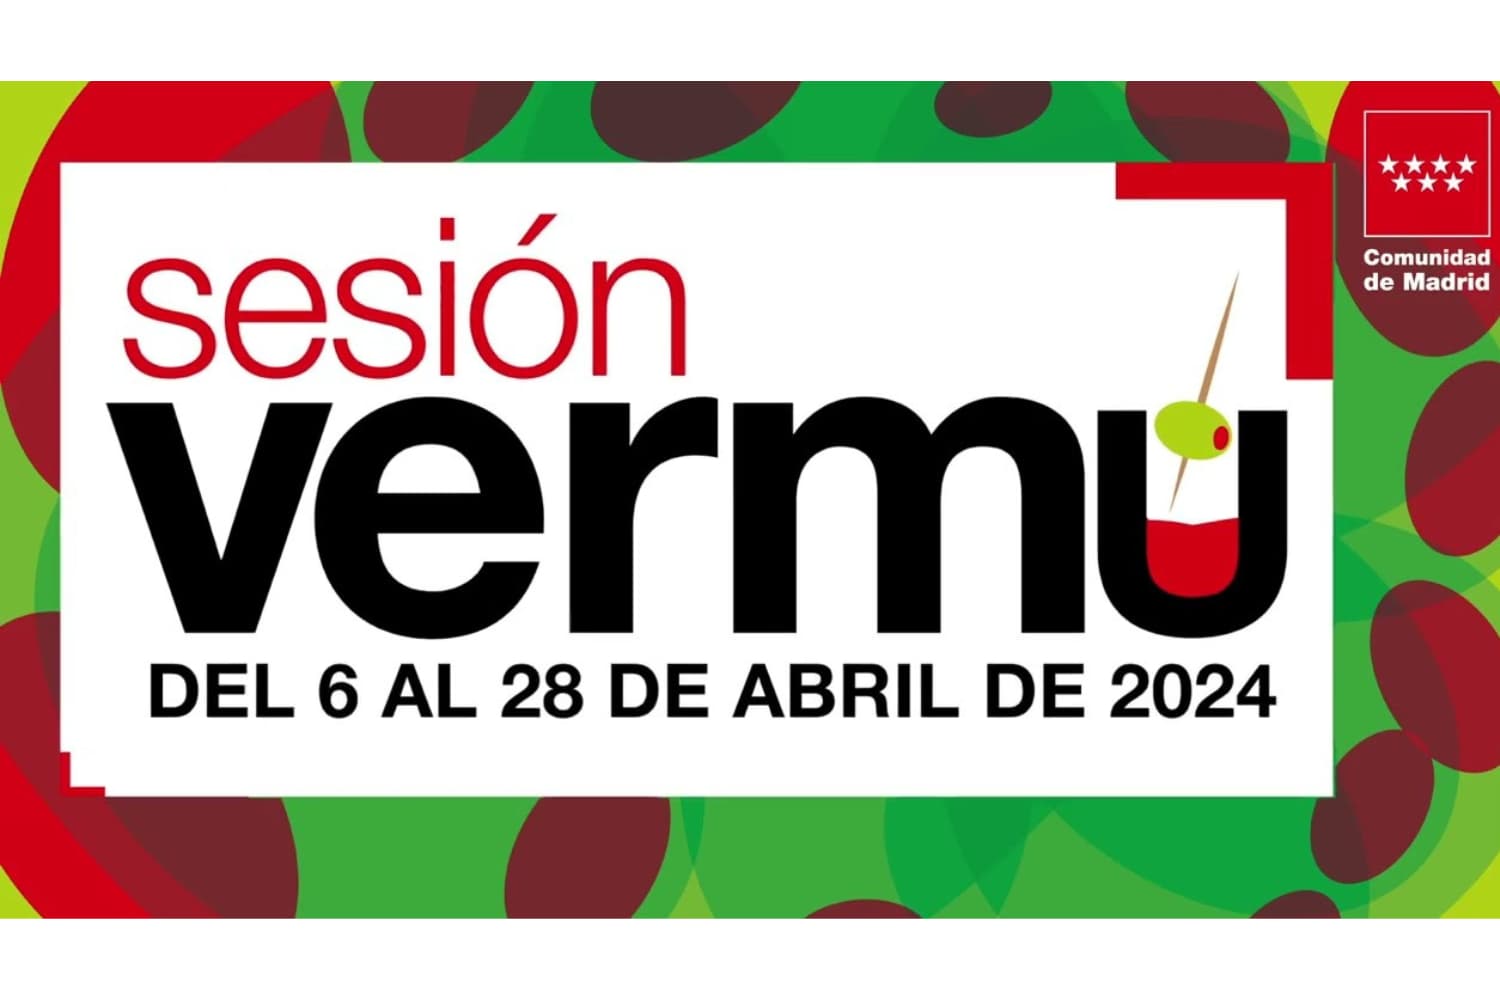 Vermouth Session 2024: a unique concert in the Region of Madrid